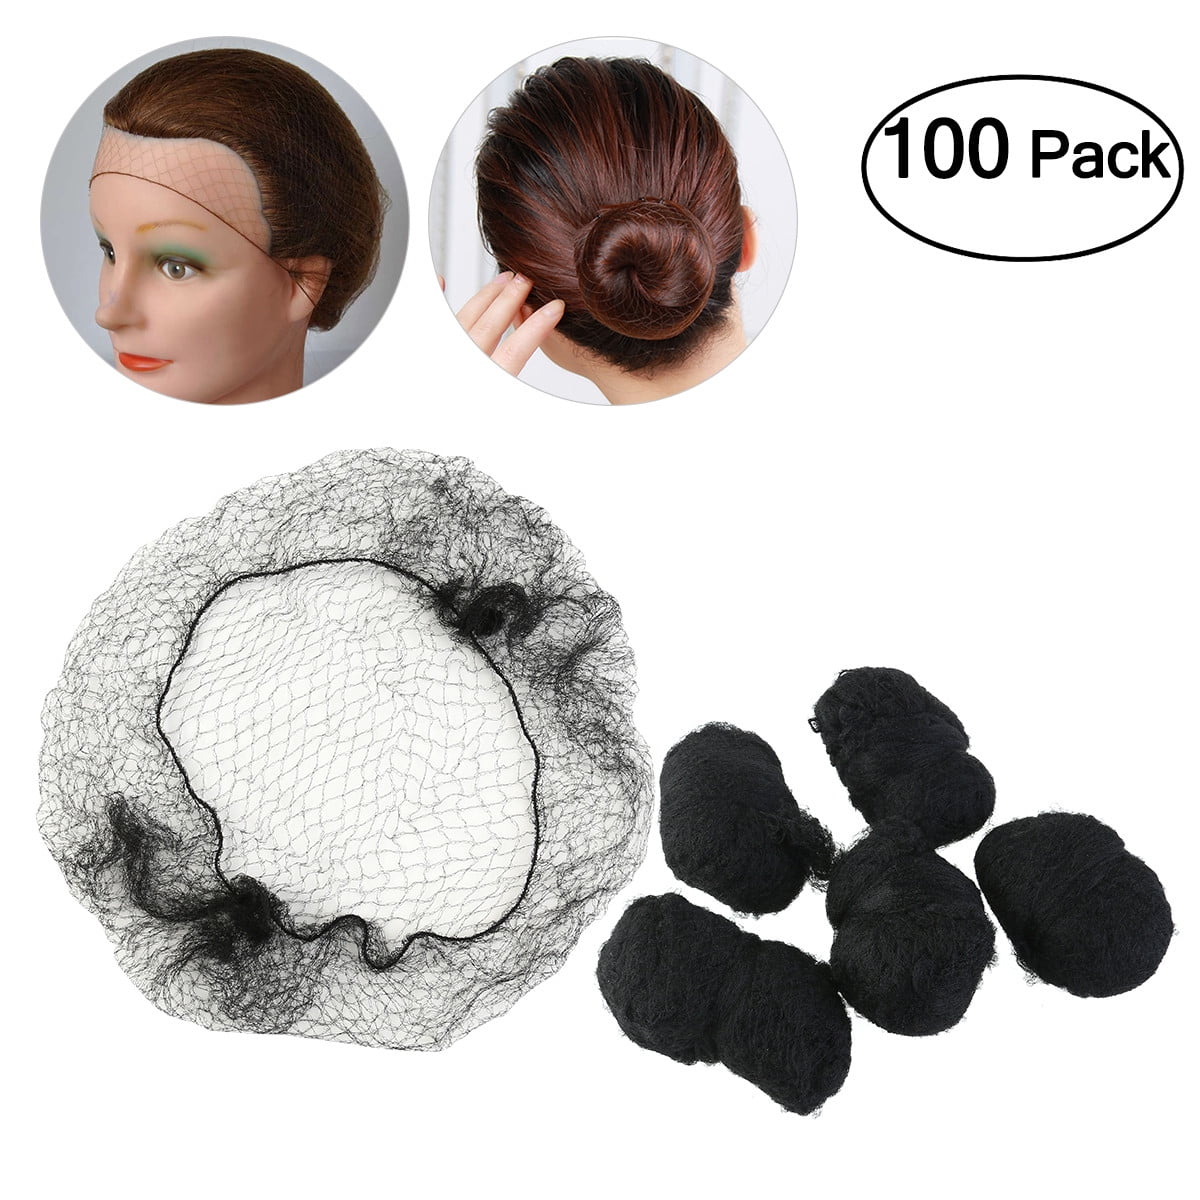 Hair Nets fine mesh for catering Suntanning salons safety wear Deli bakery lot